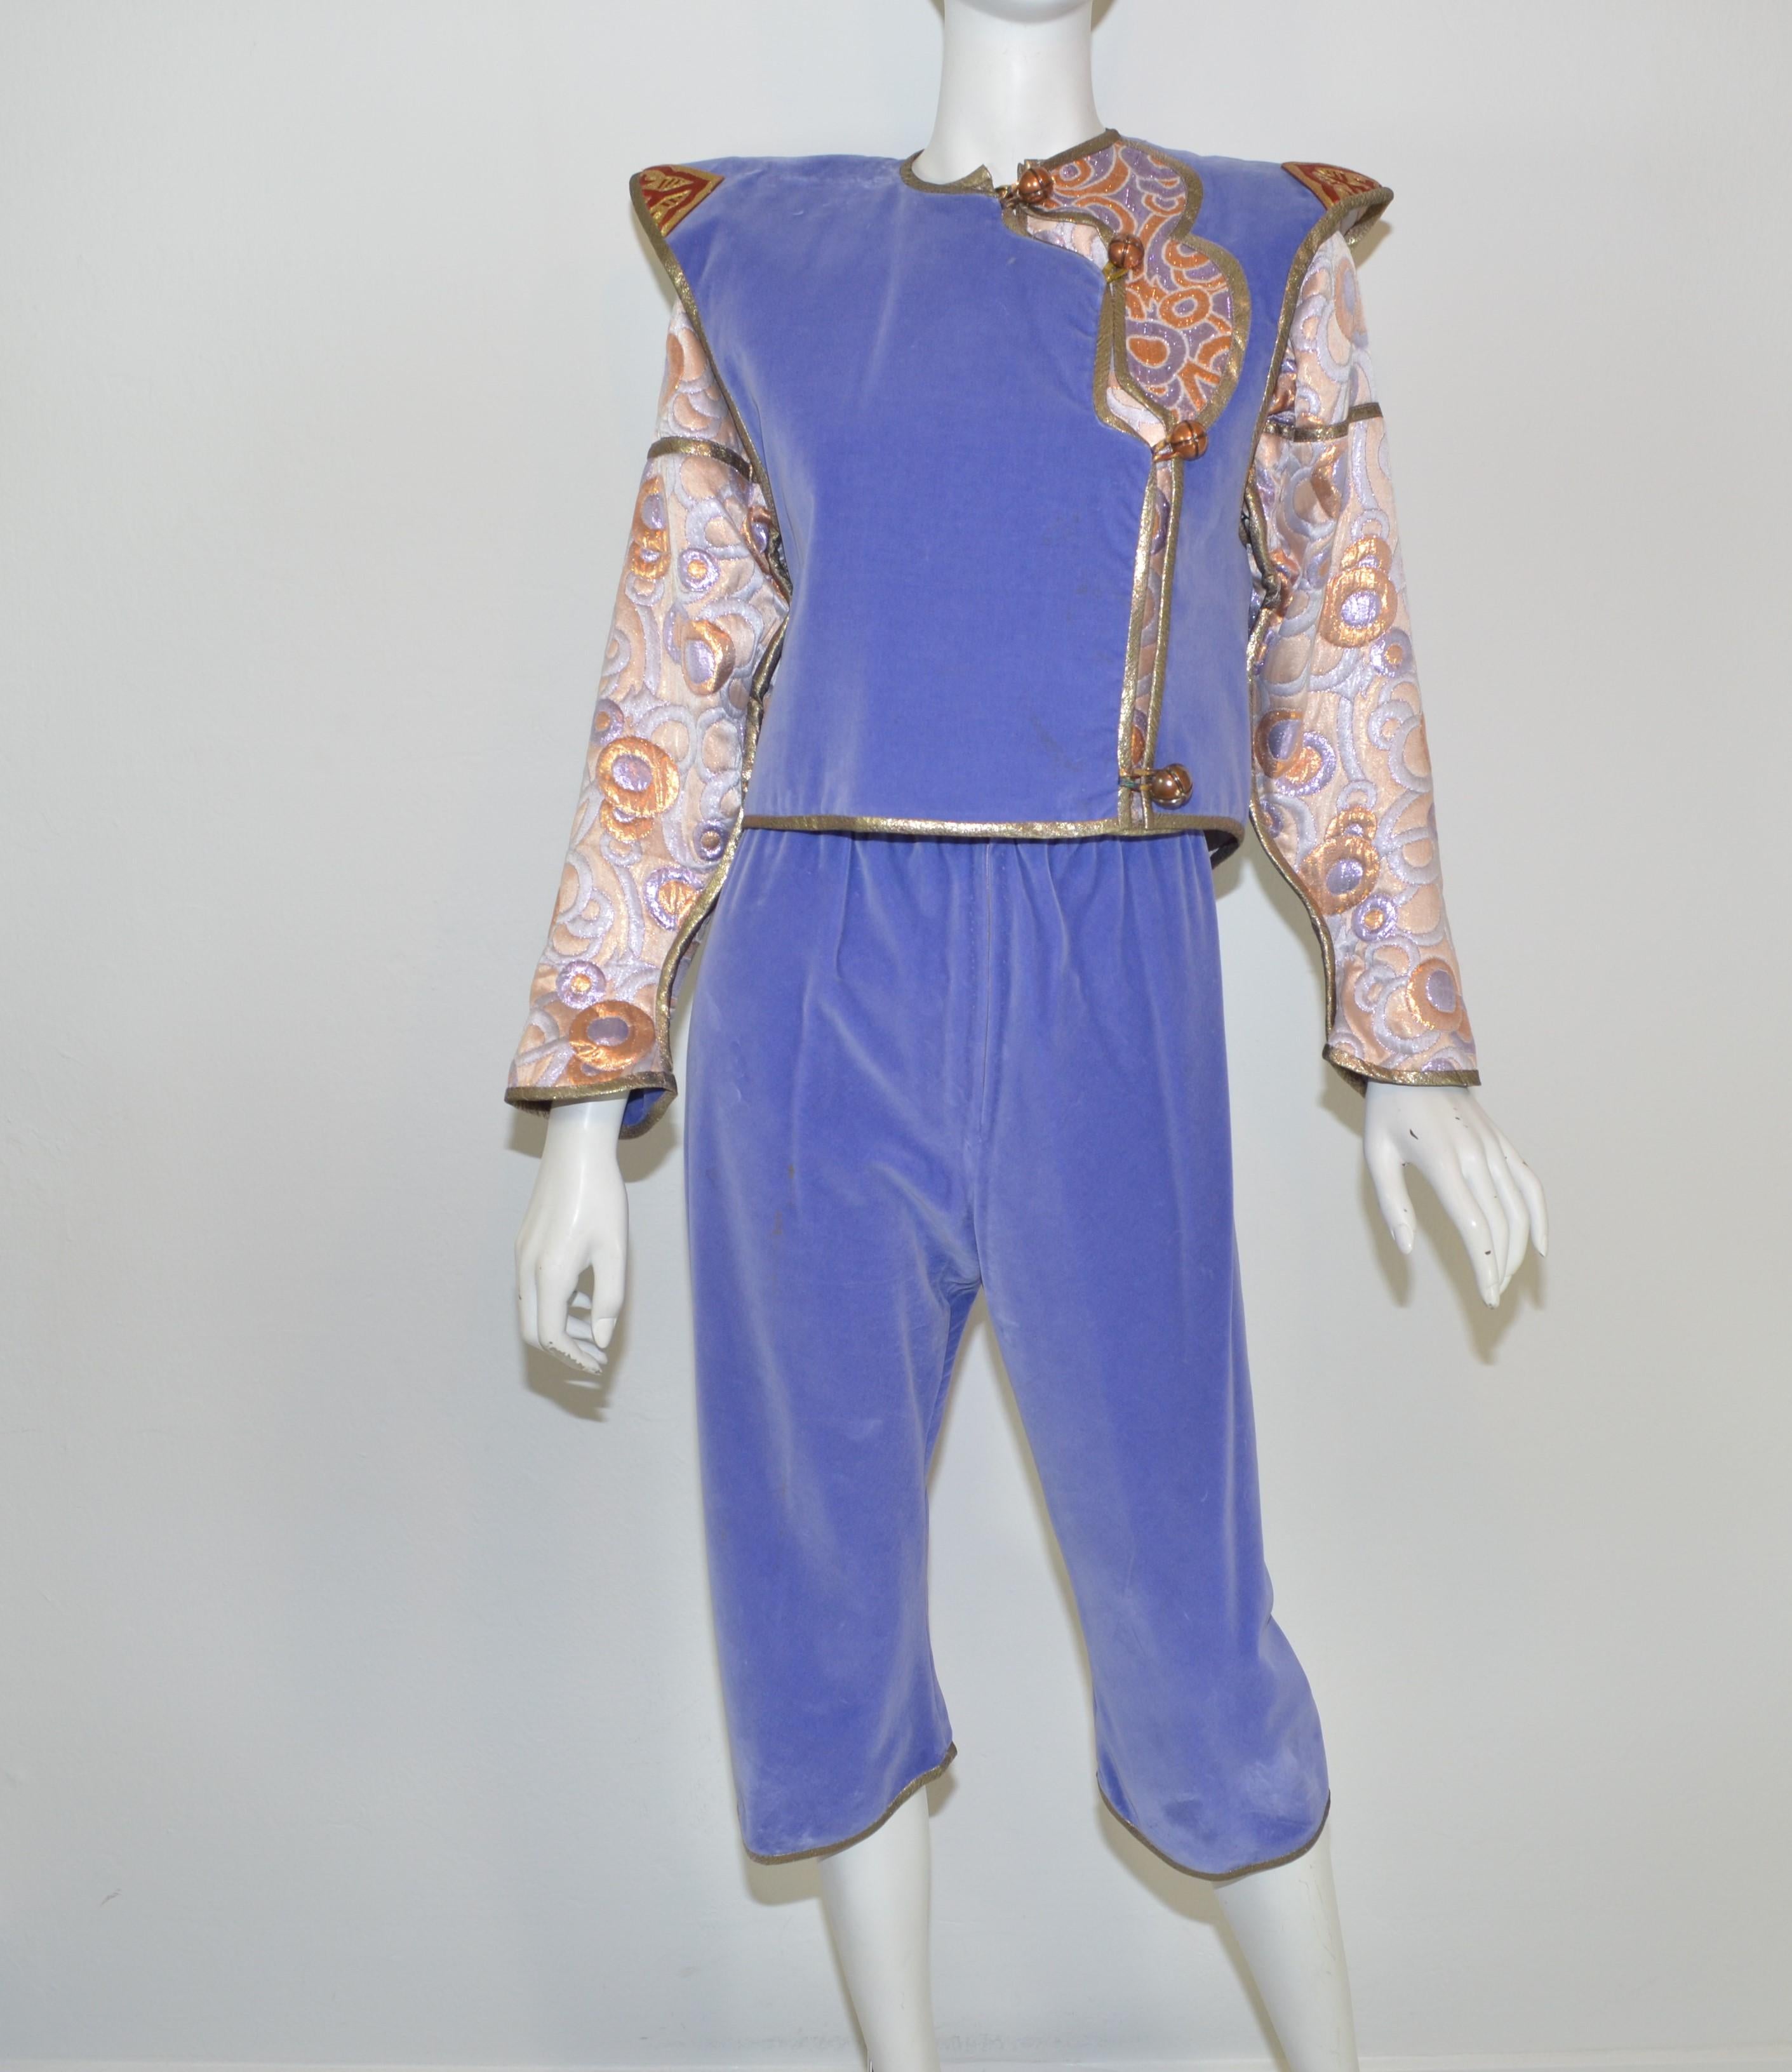 This ensemble includes: pants, jacket, chiffon blouse and vest. Pants are featured in a lavender velvet and have a lame quilted panel around the waist with a front zipper and hook fastening. Vest is reversible and has knotted button closures along